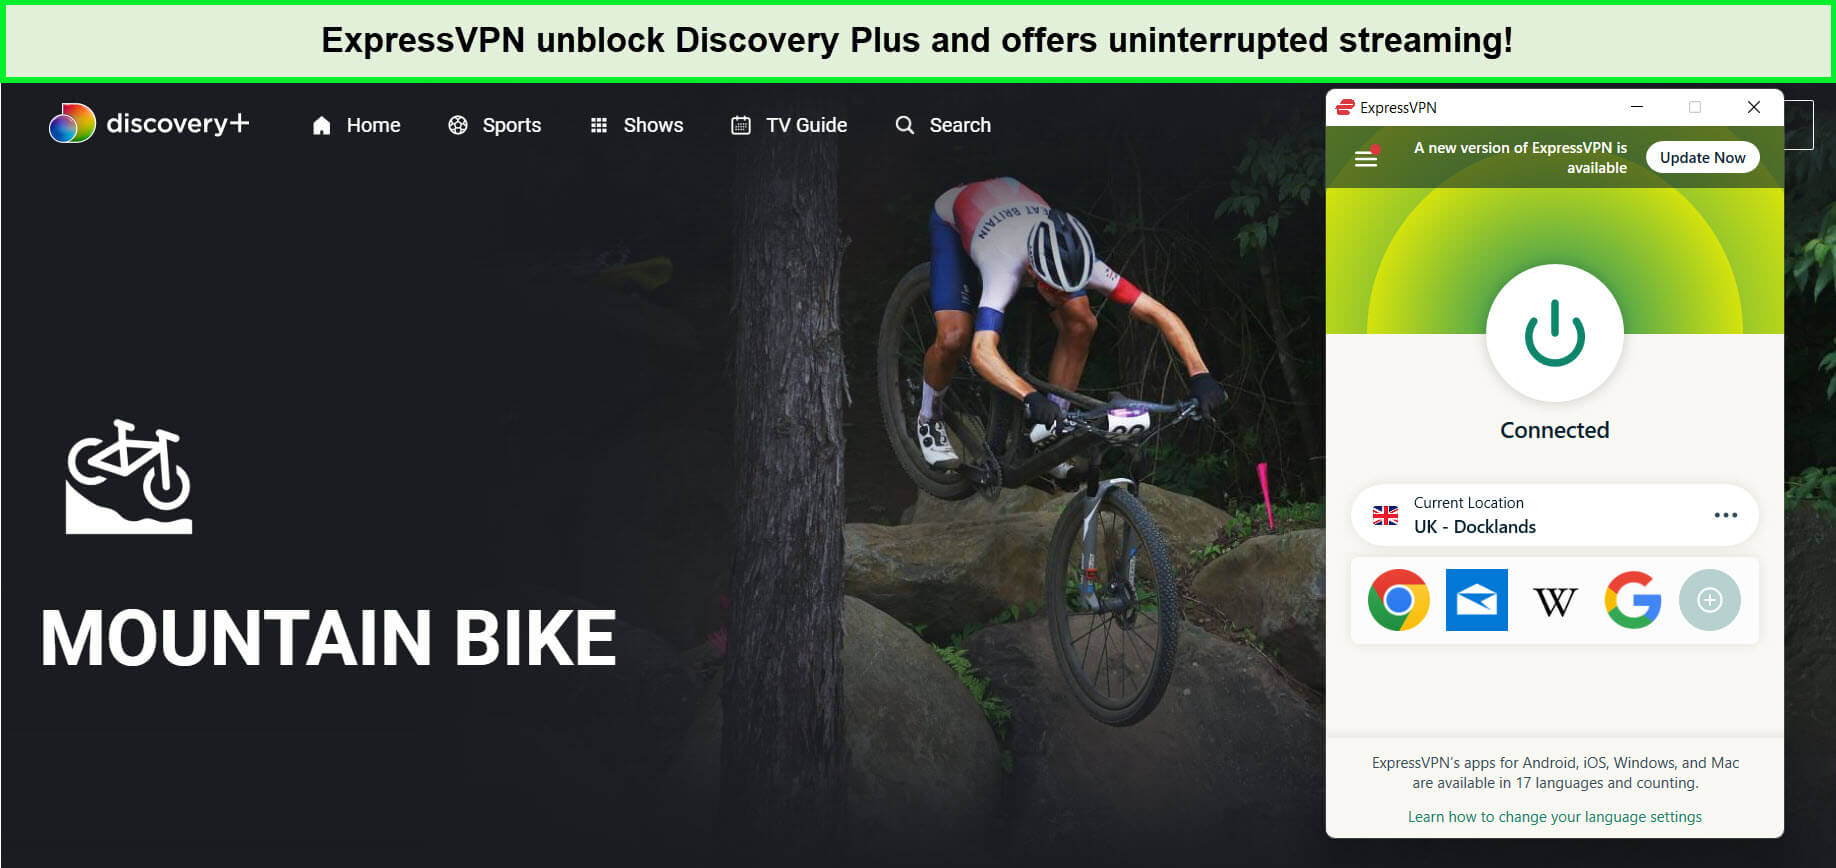 expressvpn-unblocks-uci-mountain-bike-world-series-in-US-discovery-plus